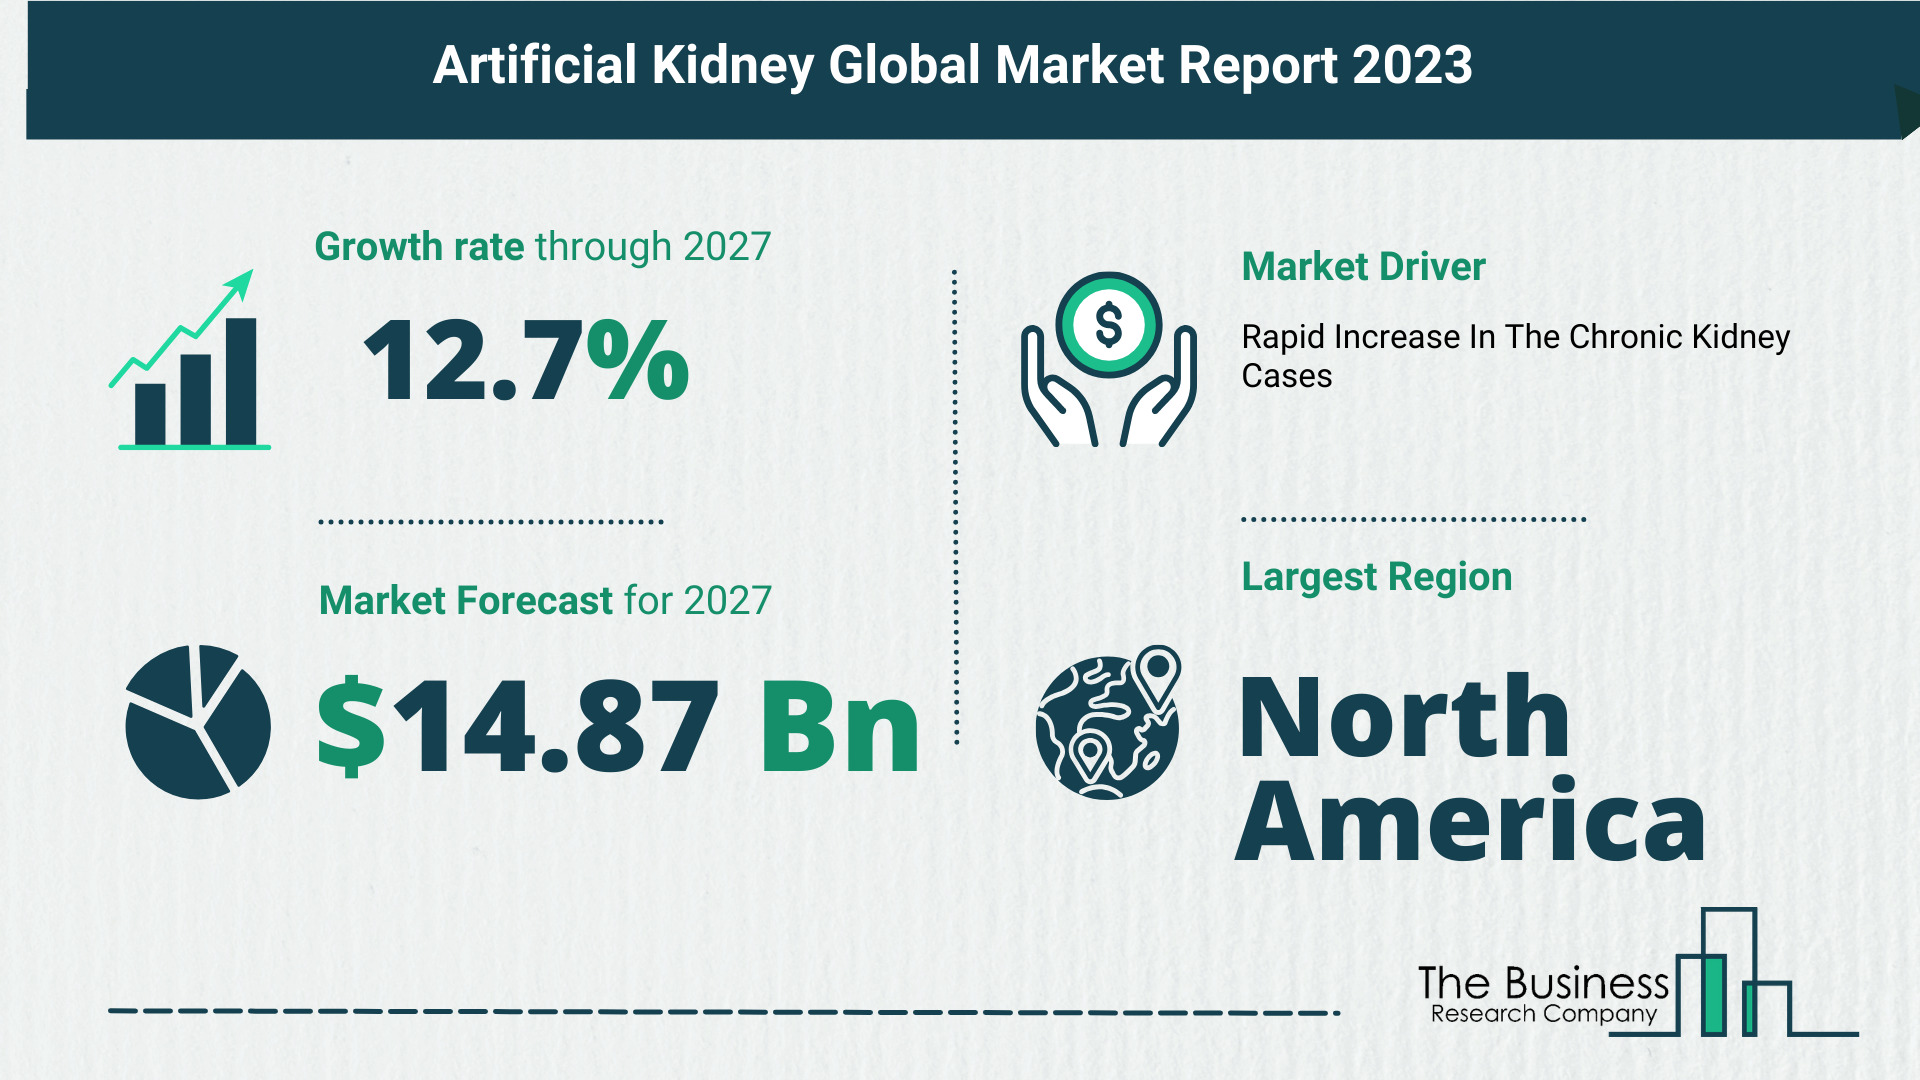 Key Insights On The Artificial Kidney Market 2023 – Size, Driver, And Major Players